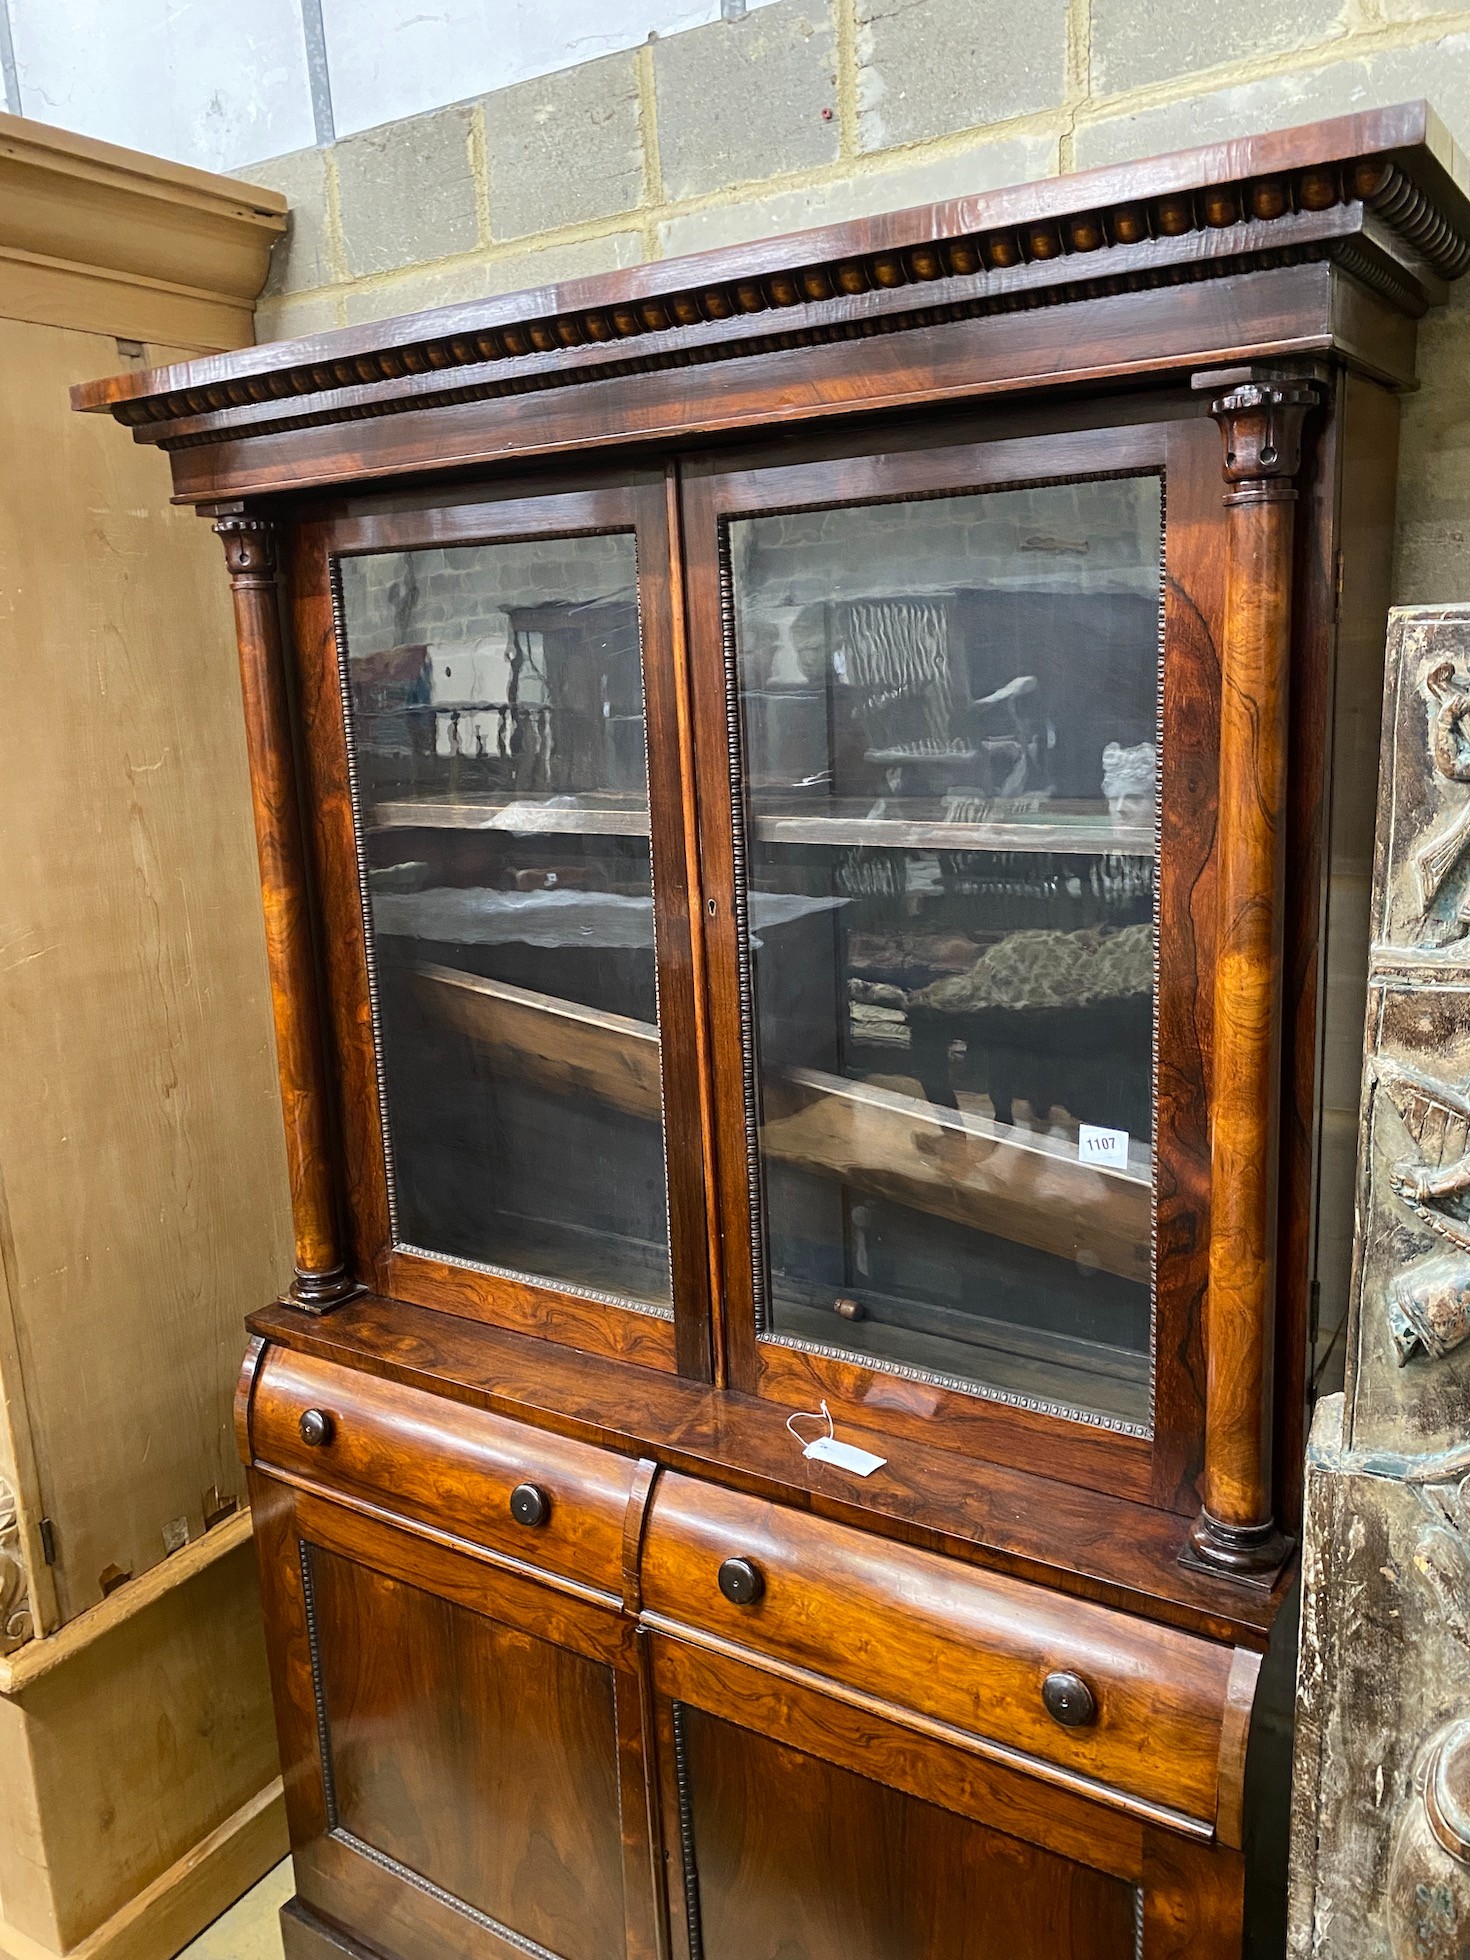 An early Victorian rosewood bookcase, width 127cm, height 190cm